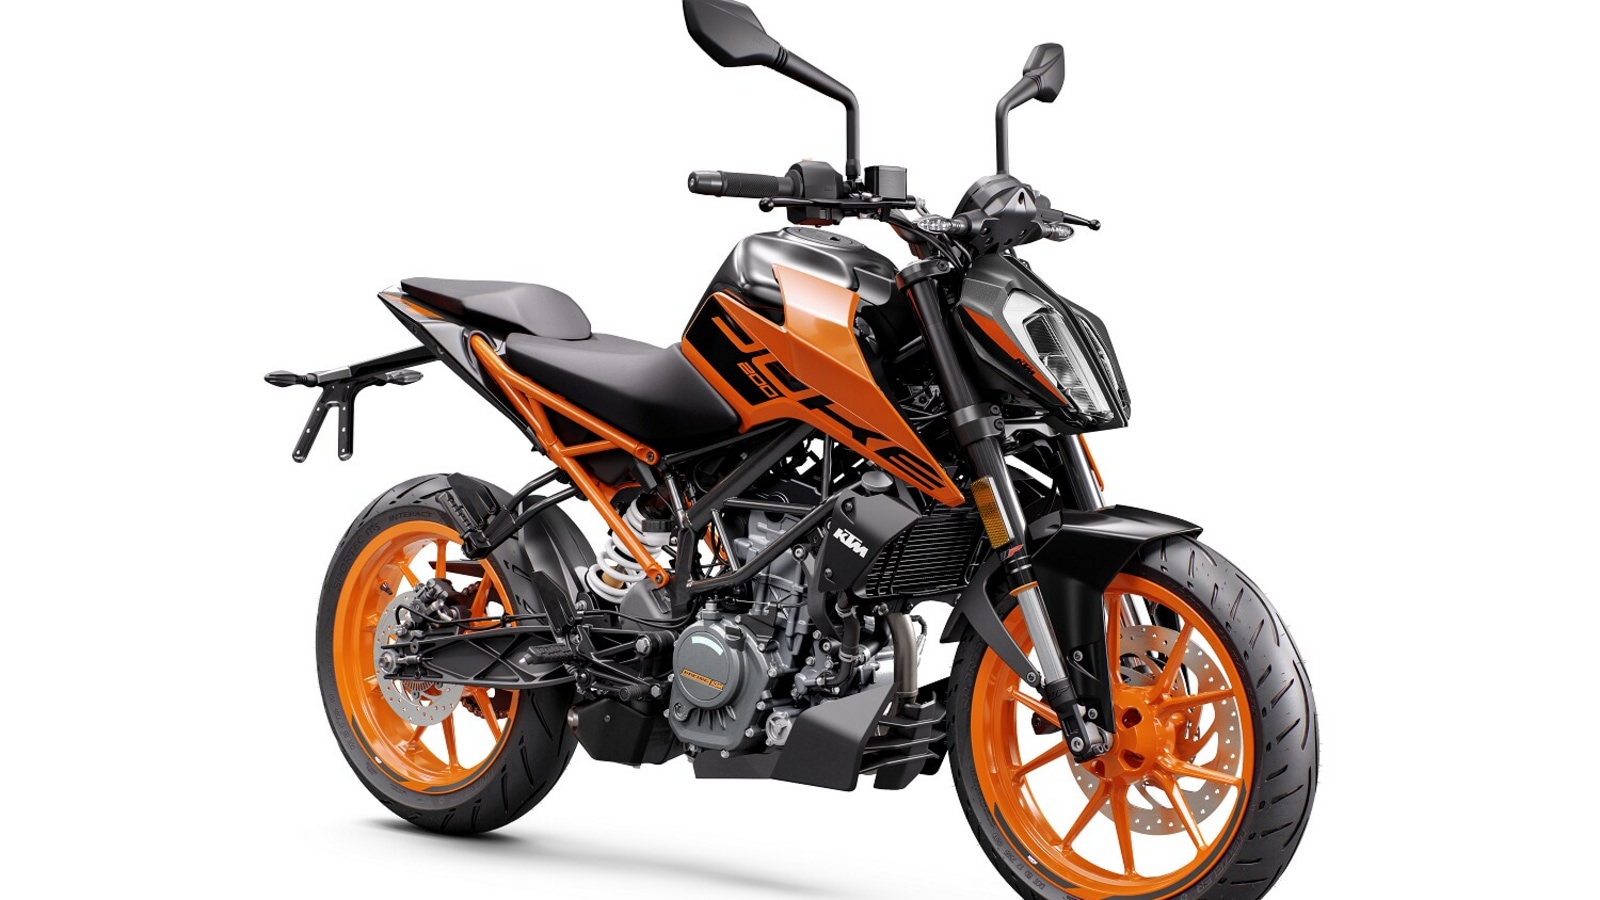 2023 KTM 200 Duke launched at ₹1.96 lakh, gets LED headlamp from 390